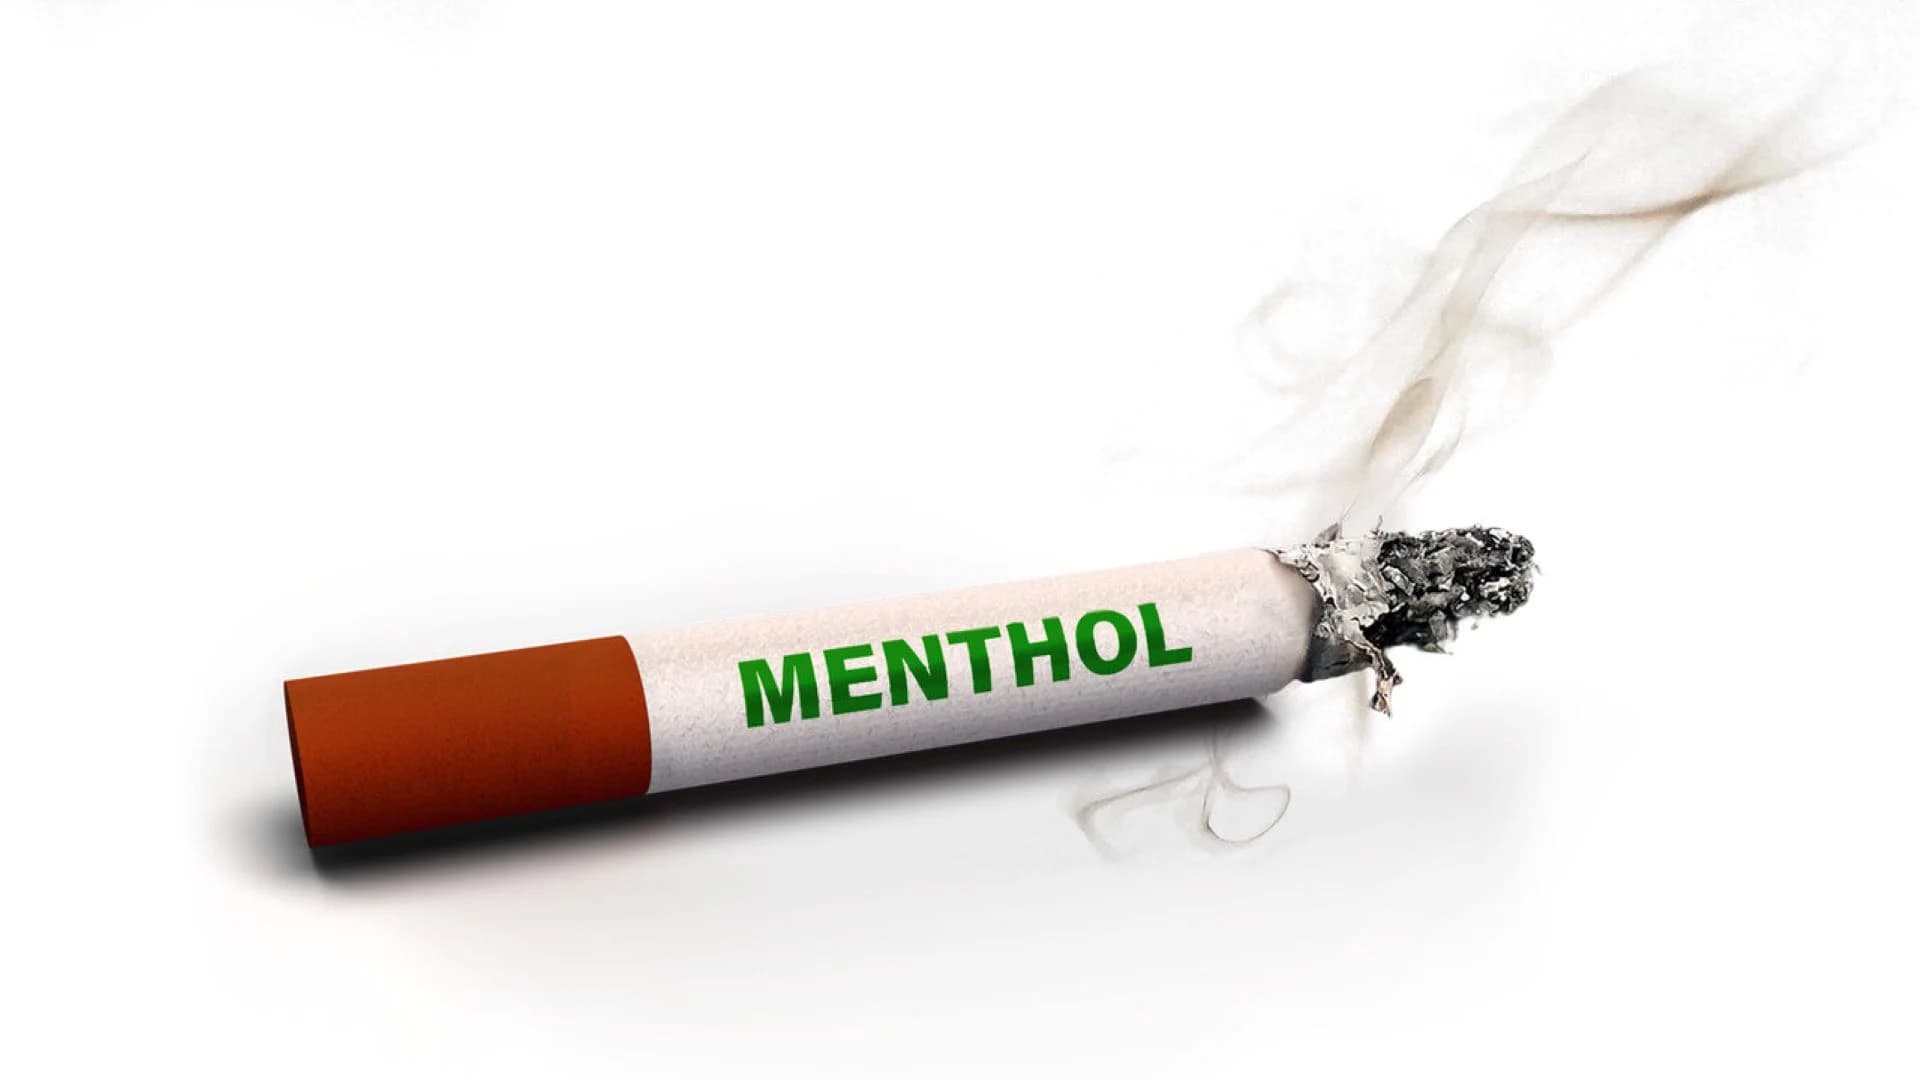 US vows again to ban menthol flavor in cigarettes, cigars